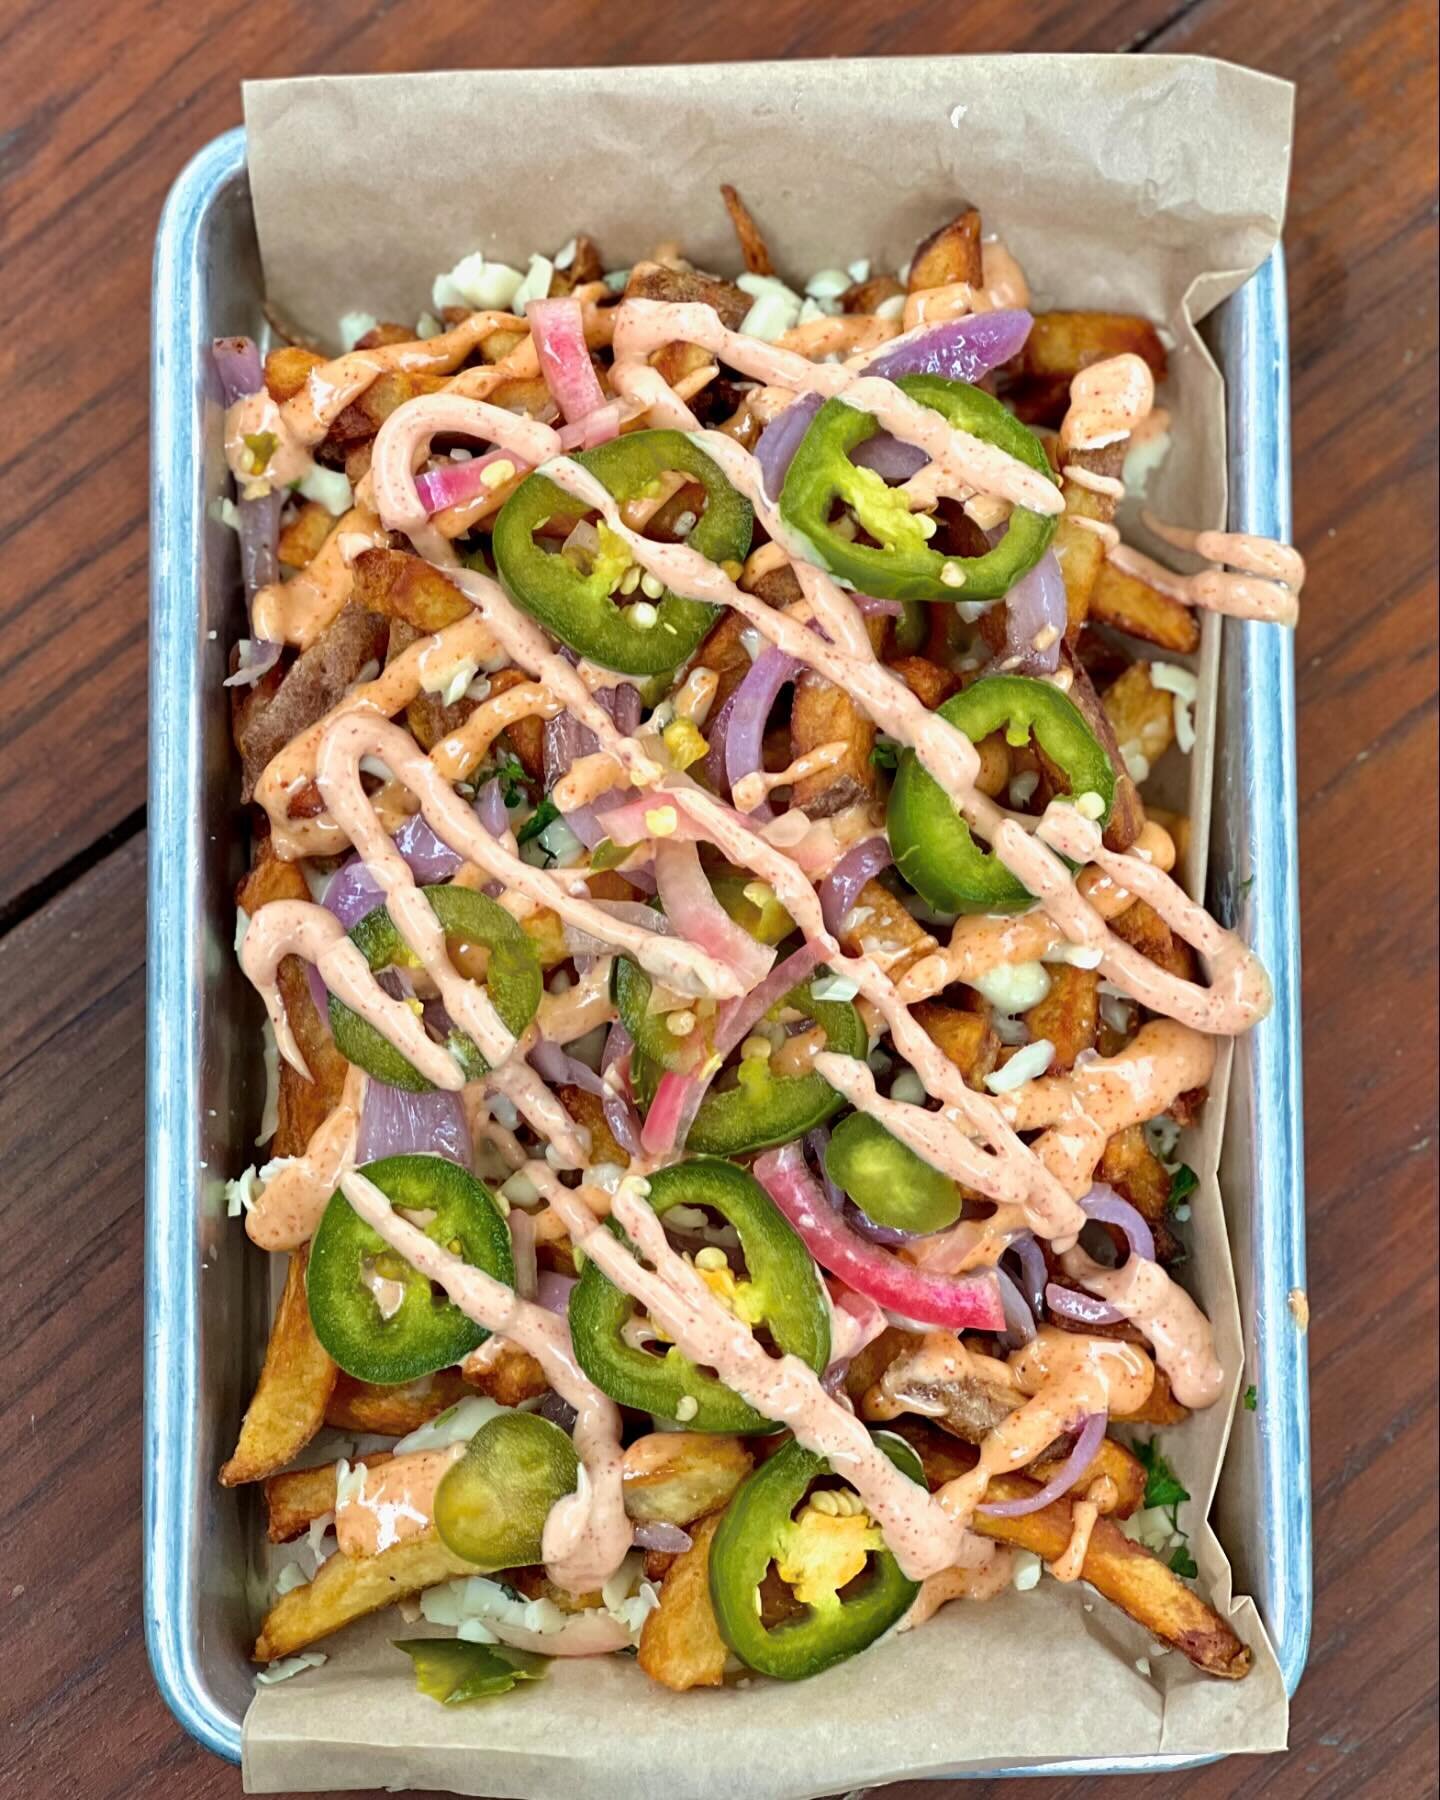 Join us for lunch 11am - 2pm 
Try our Hideaway special loaded fries: swiss cheese, sauteed onions, bread &amp; butter jalapenos, special sauce